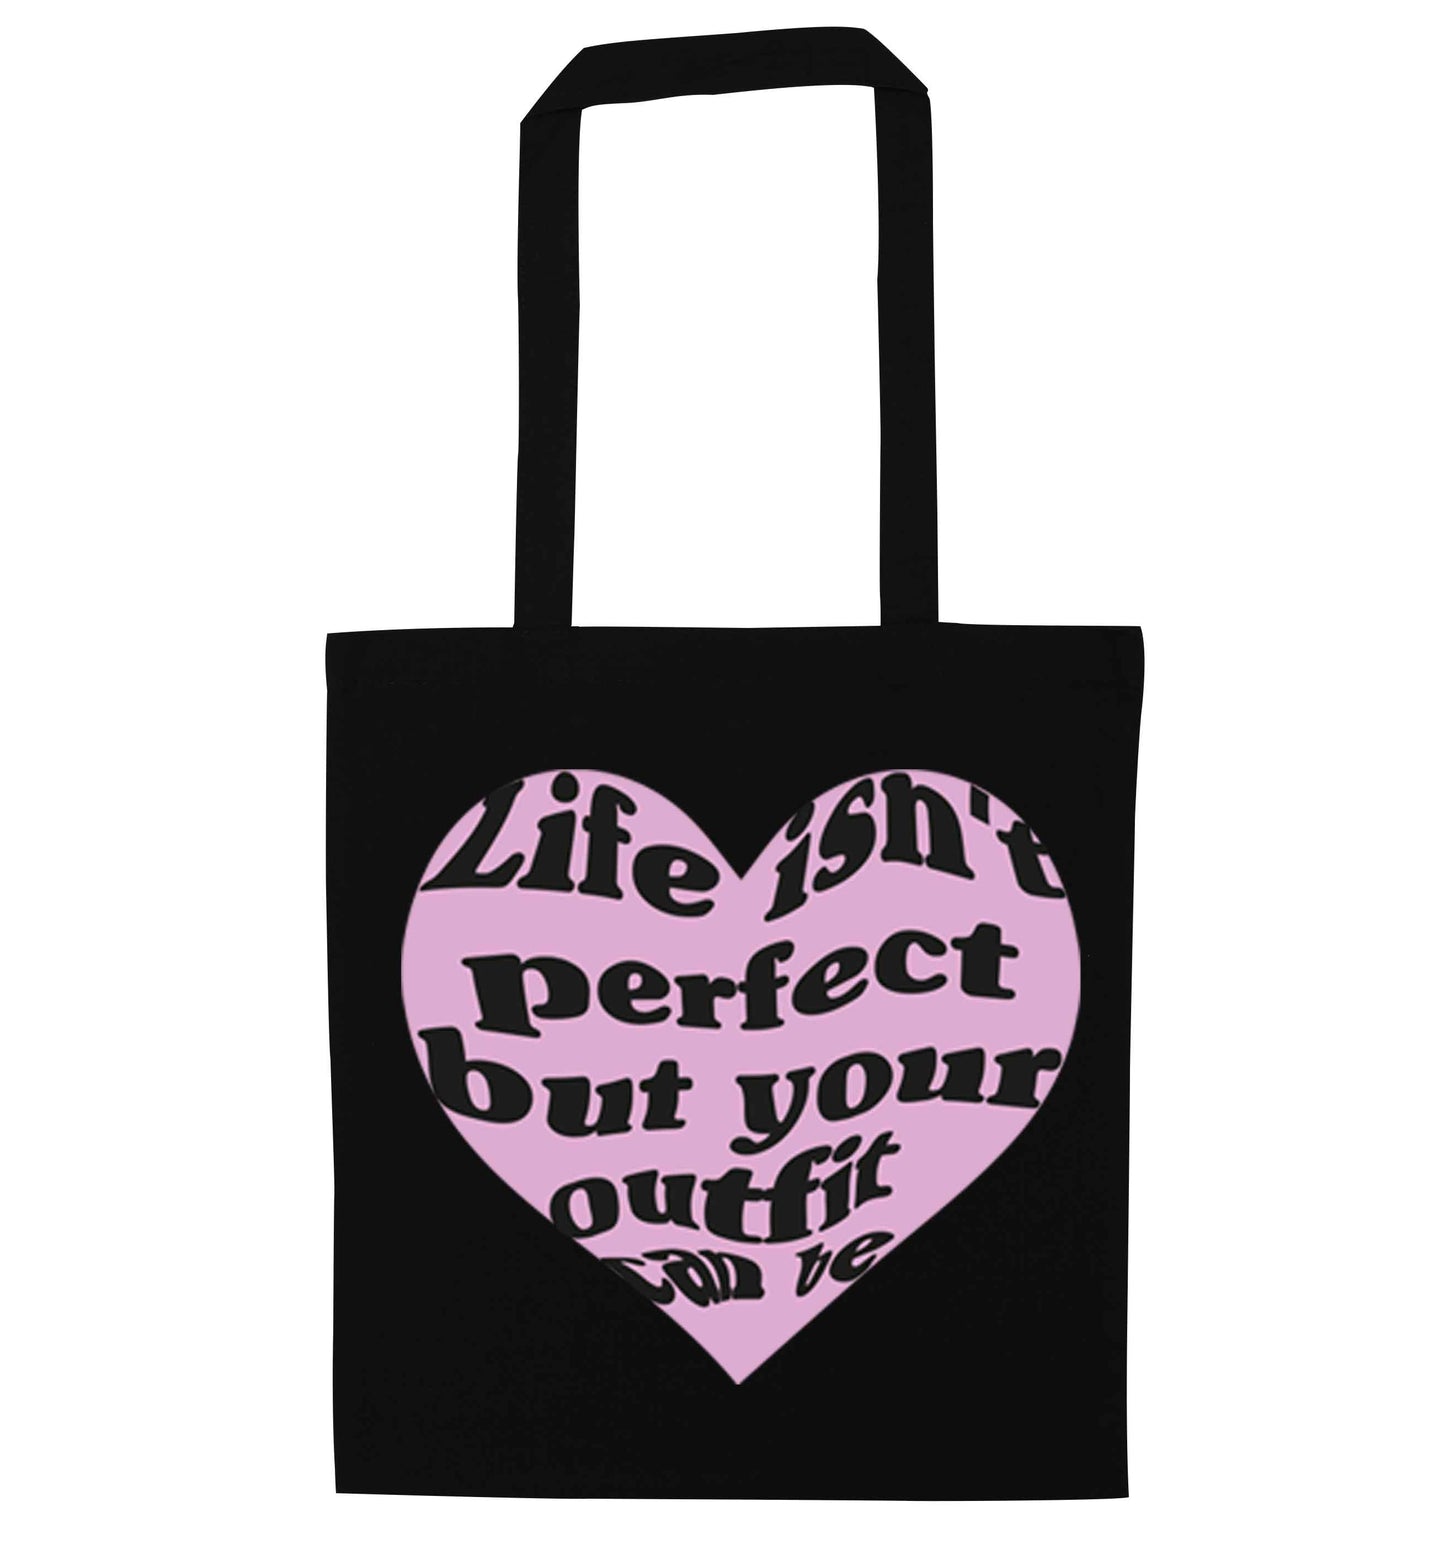 Life isn't perfect but your outfit can be black tote bag